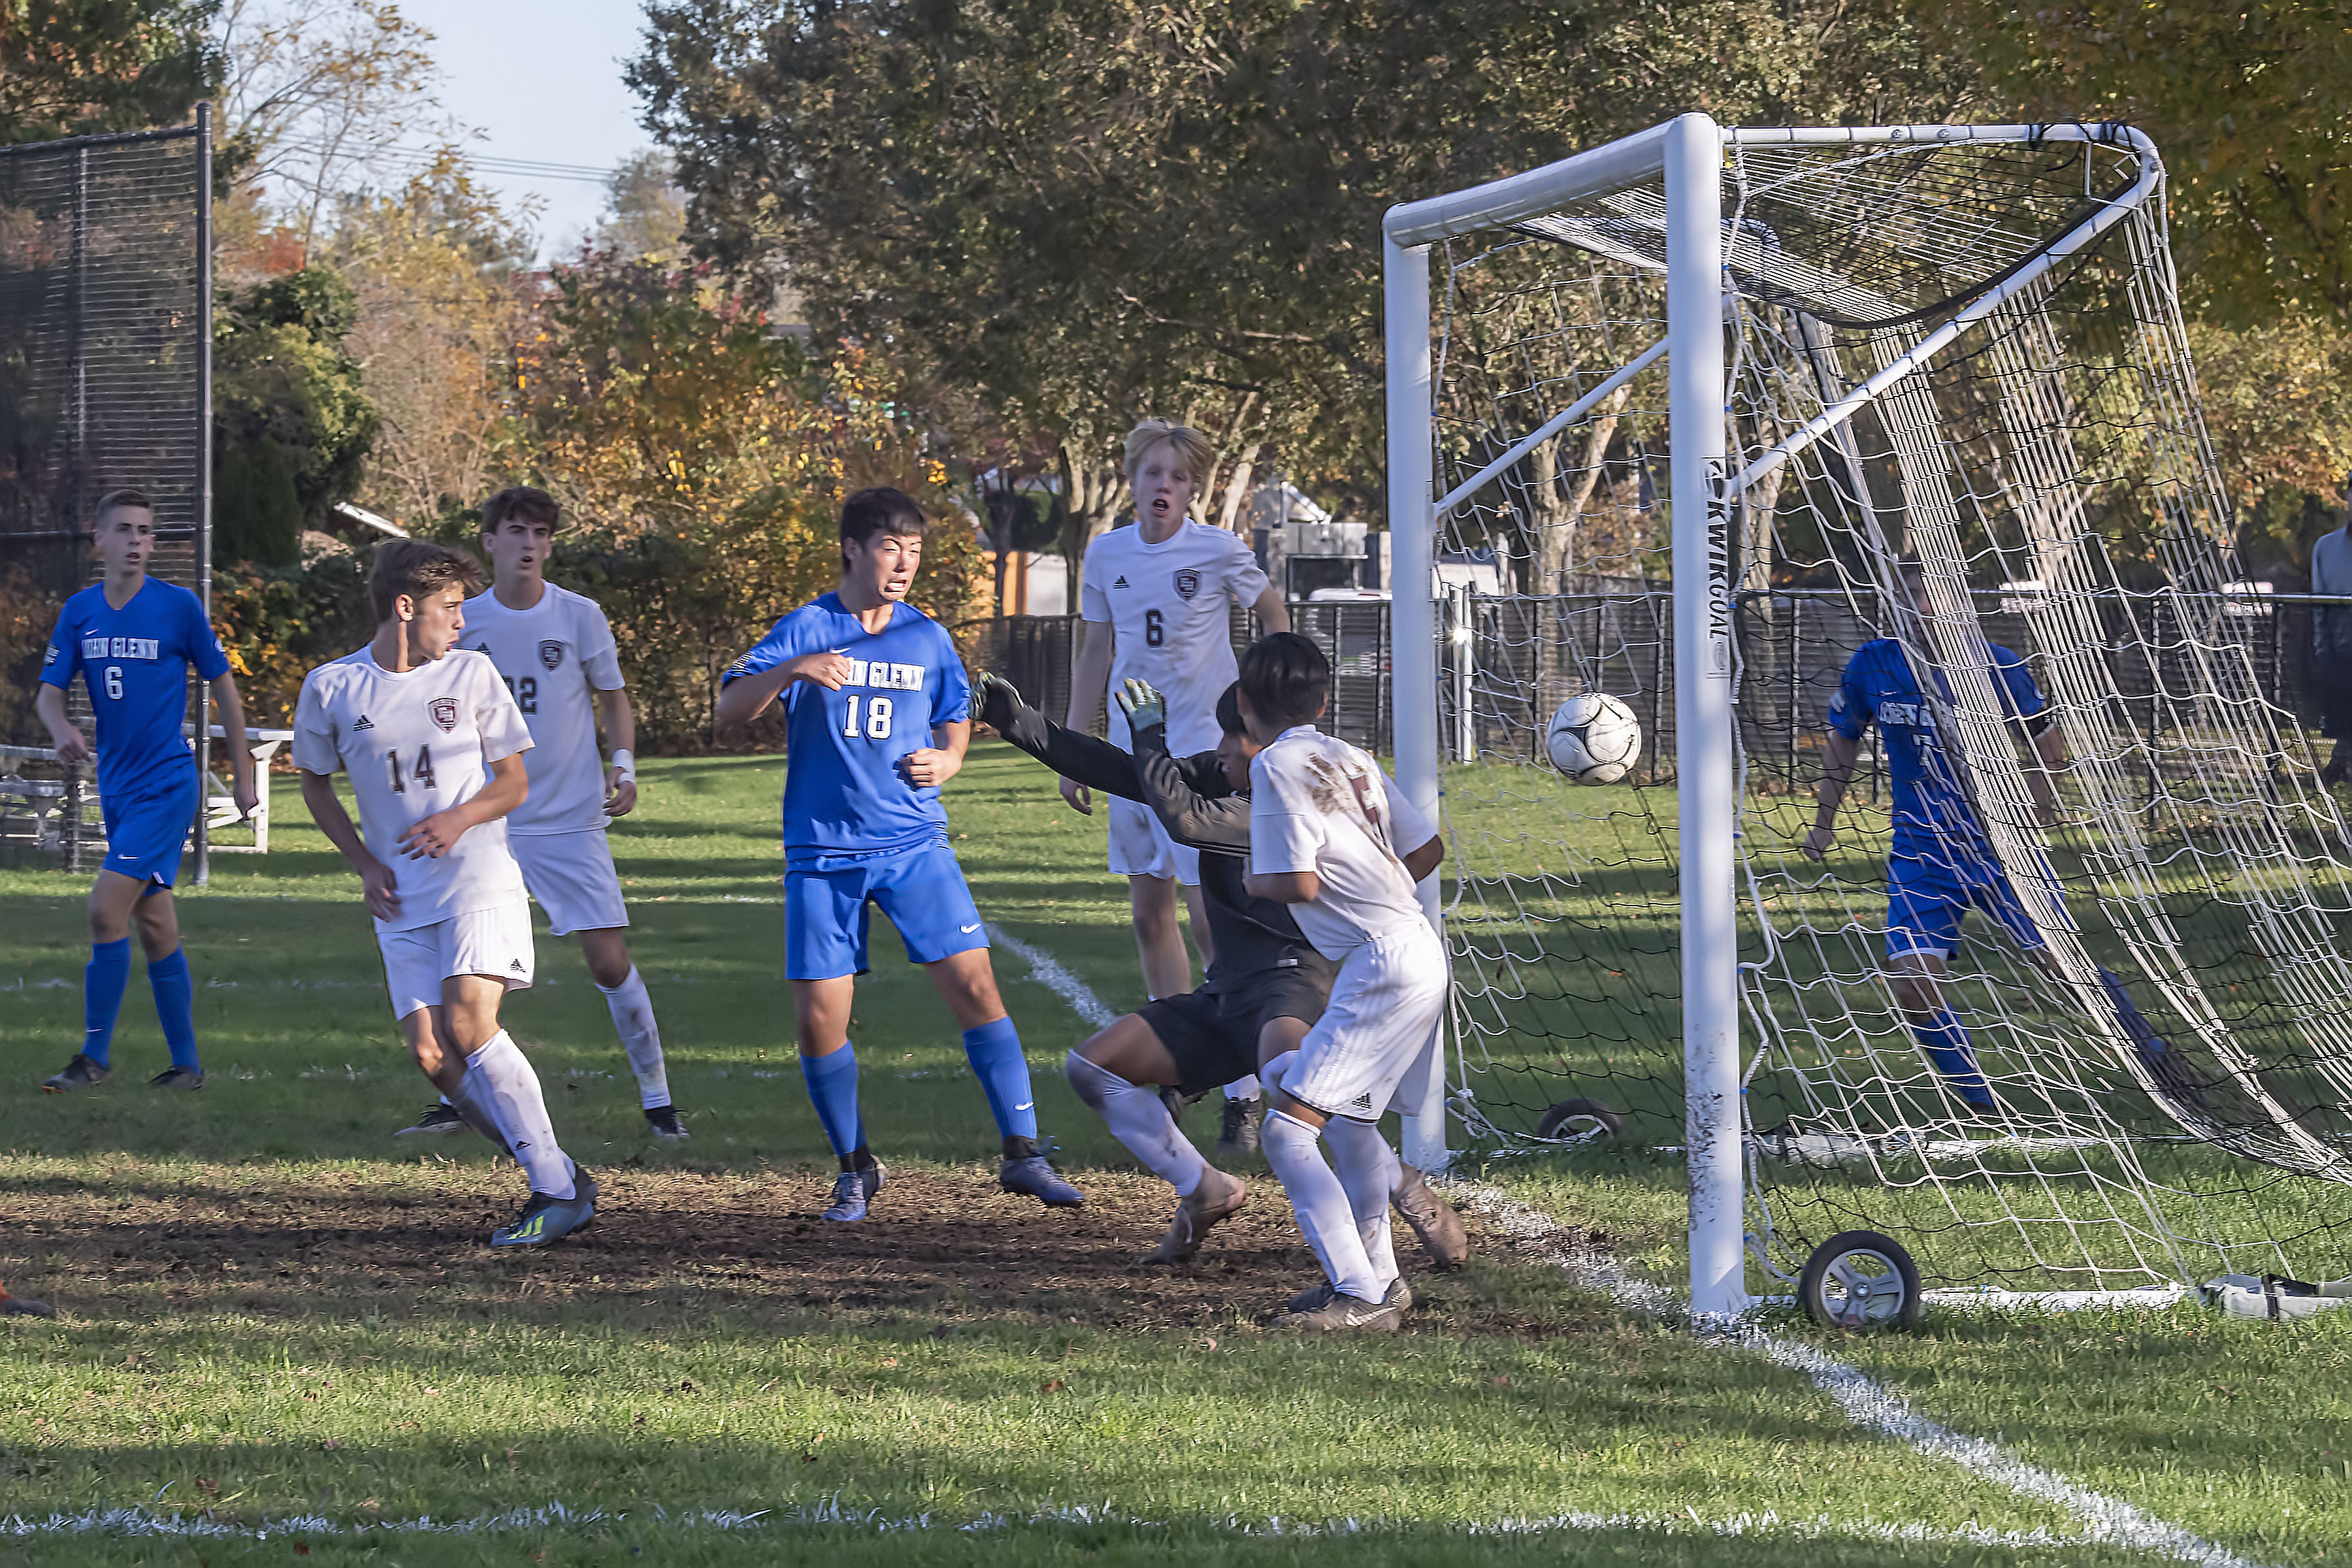 Both Knights and Bonackers watch as Jimmy Rourke's shot crosses the goal line, giving Glenn the 1-0 double overtime victory in the opening round of the Class A playoffs on Monday afternoon.